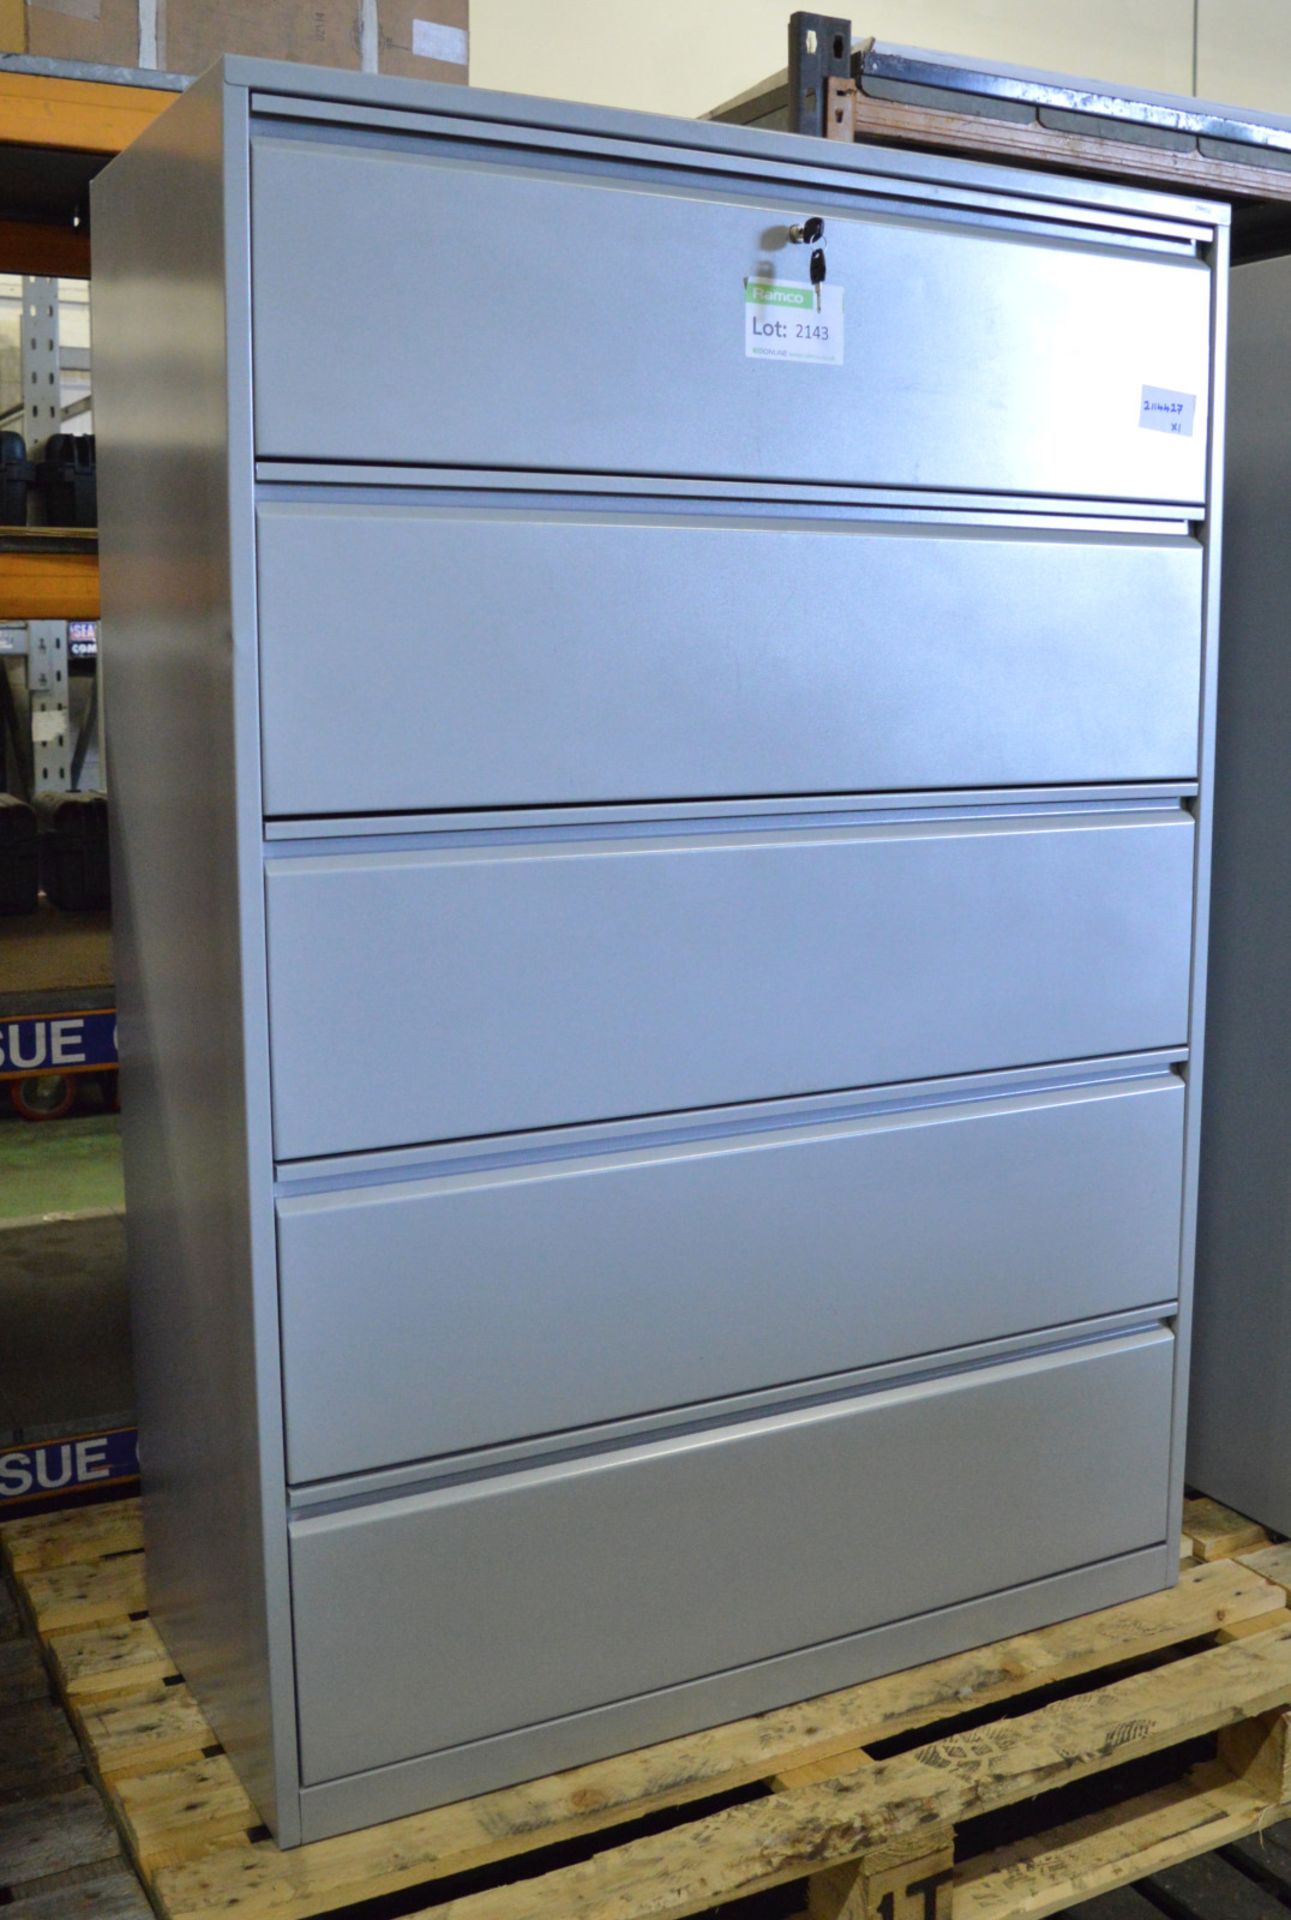 5x Drawer Card Filing Cabinet - Drawer locking mechanism requires attention.